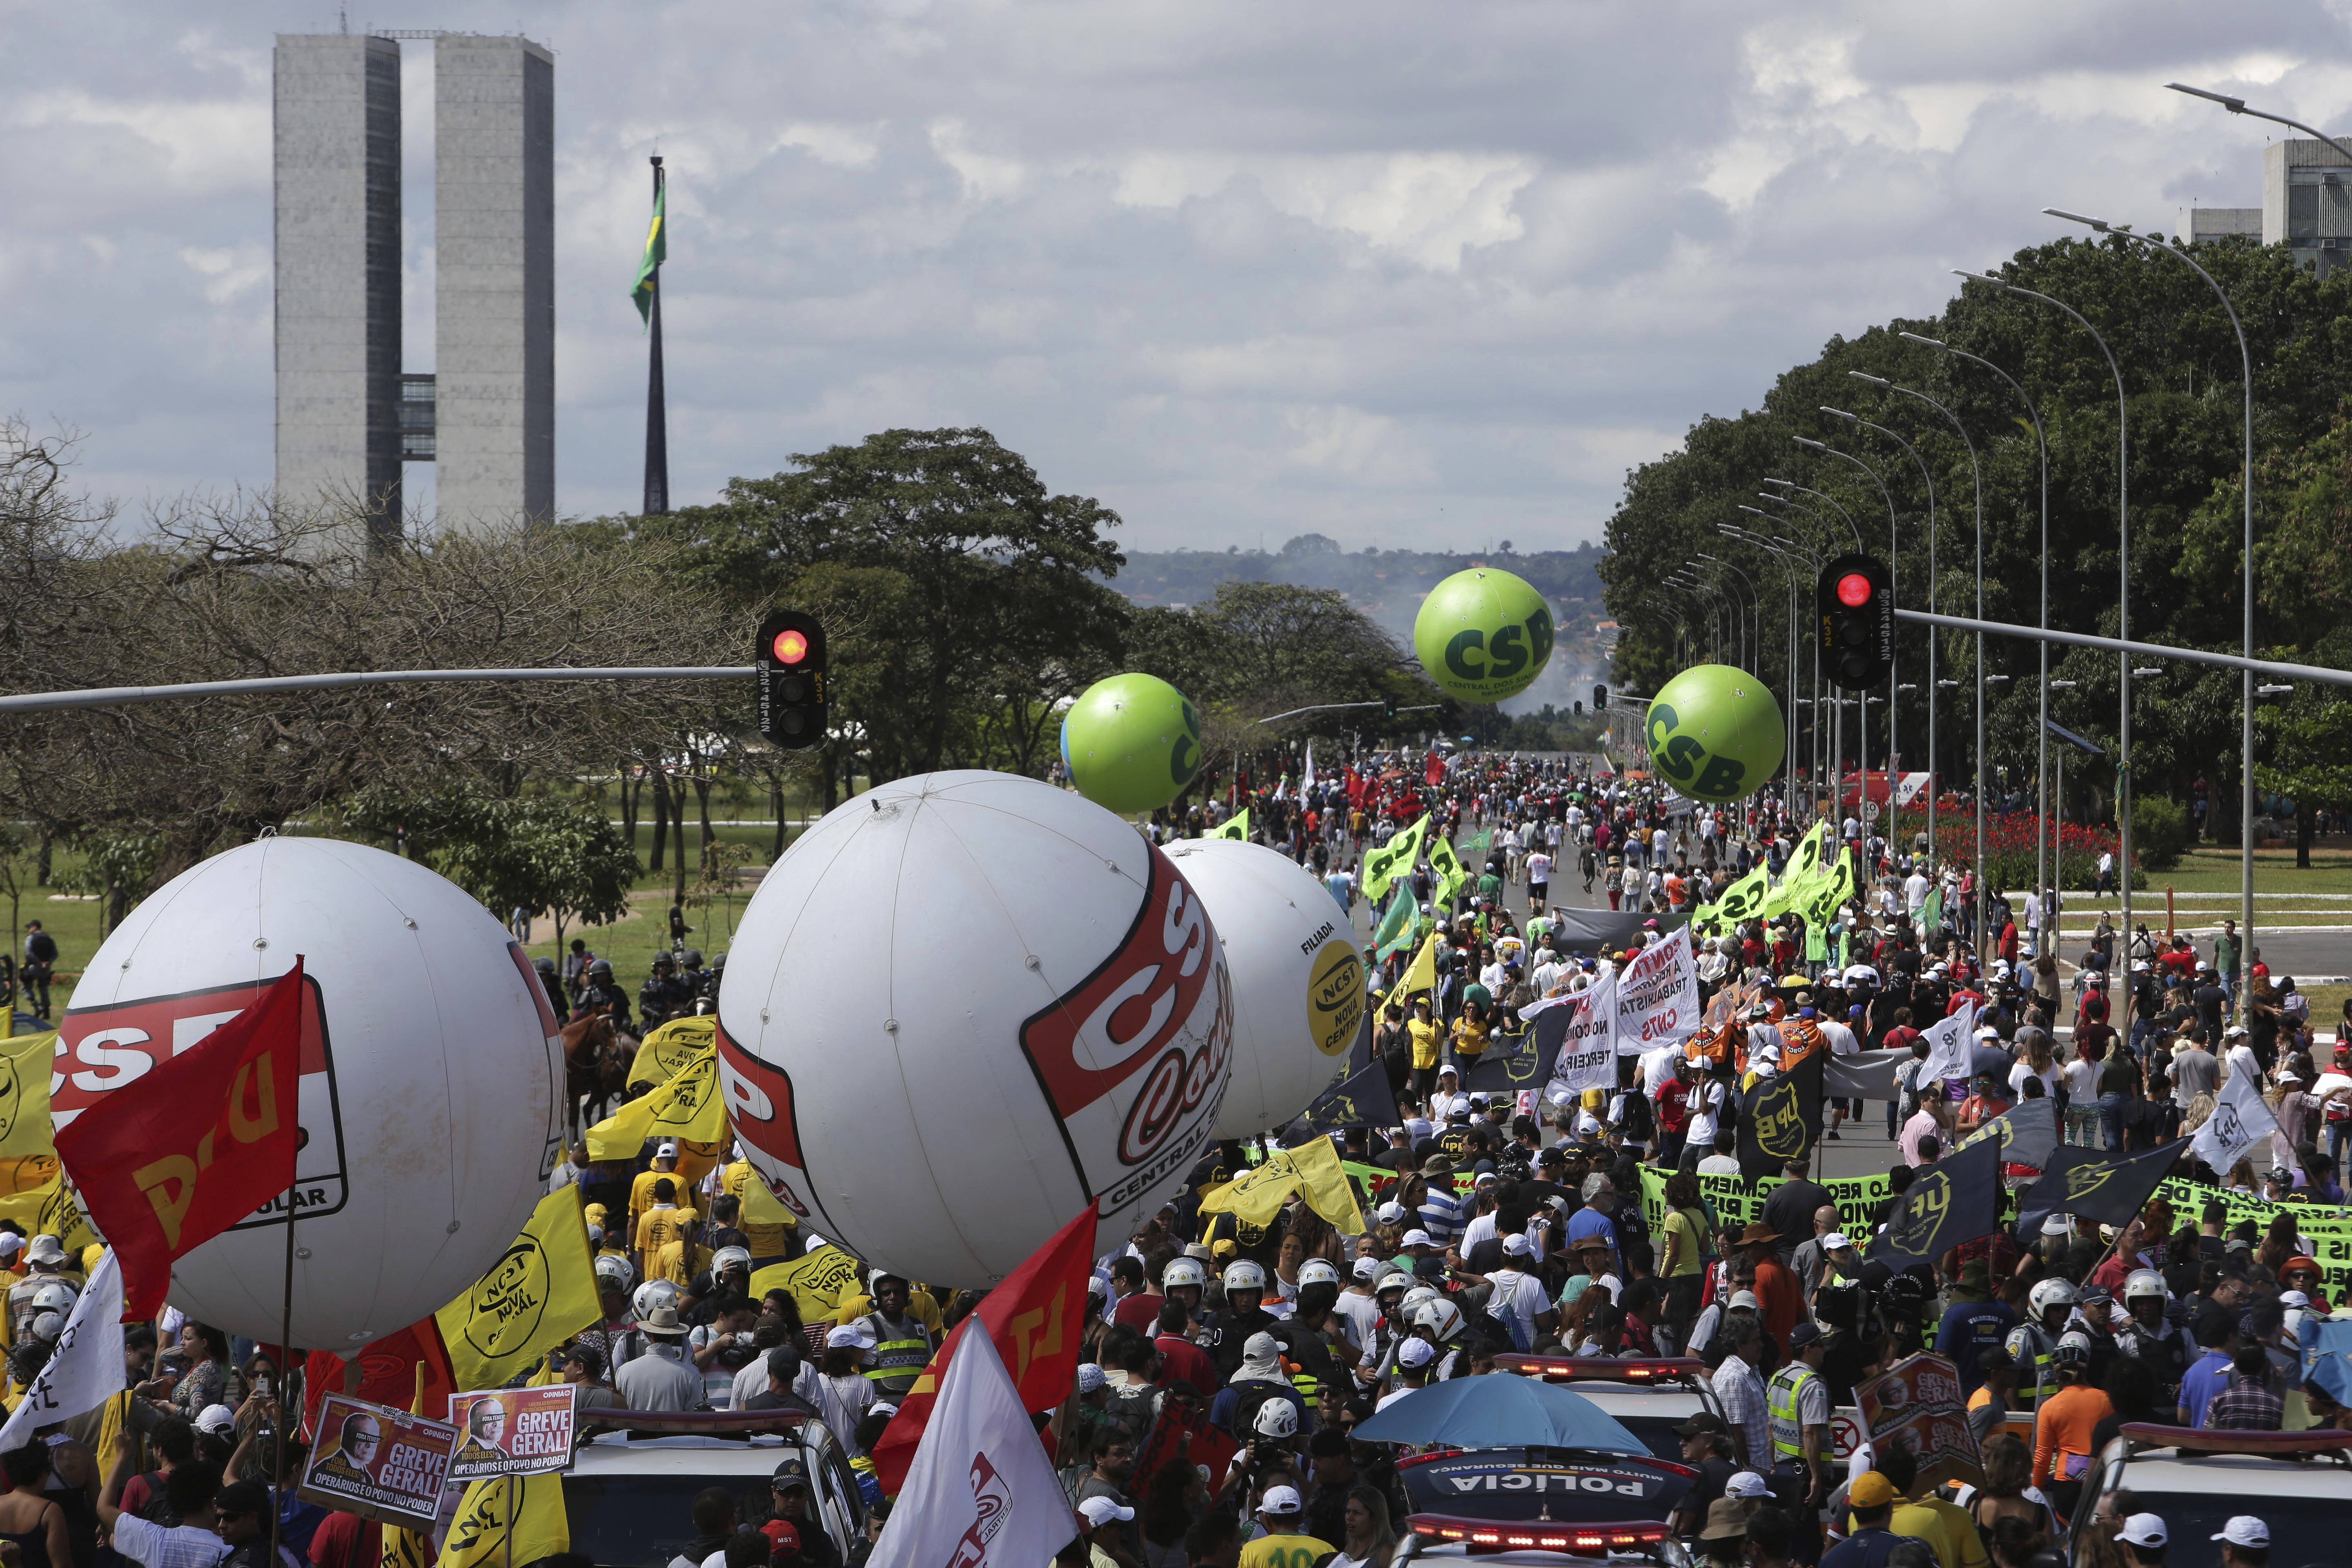 Demonstrators march during a general strike in Brasilia, Brazil, Friday, April 28, 2017. Public transport largely came to a halt across much of Brazil on Friday and protesters blocked roads and scuffled with police as part of a general strike to protest proposed changes to labor laws and the pension system. (AP Photo/Eraldo Peres)